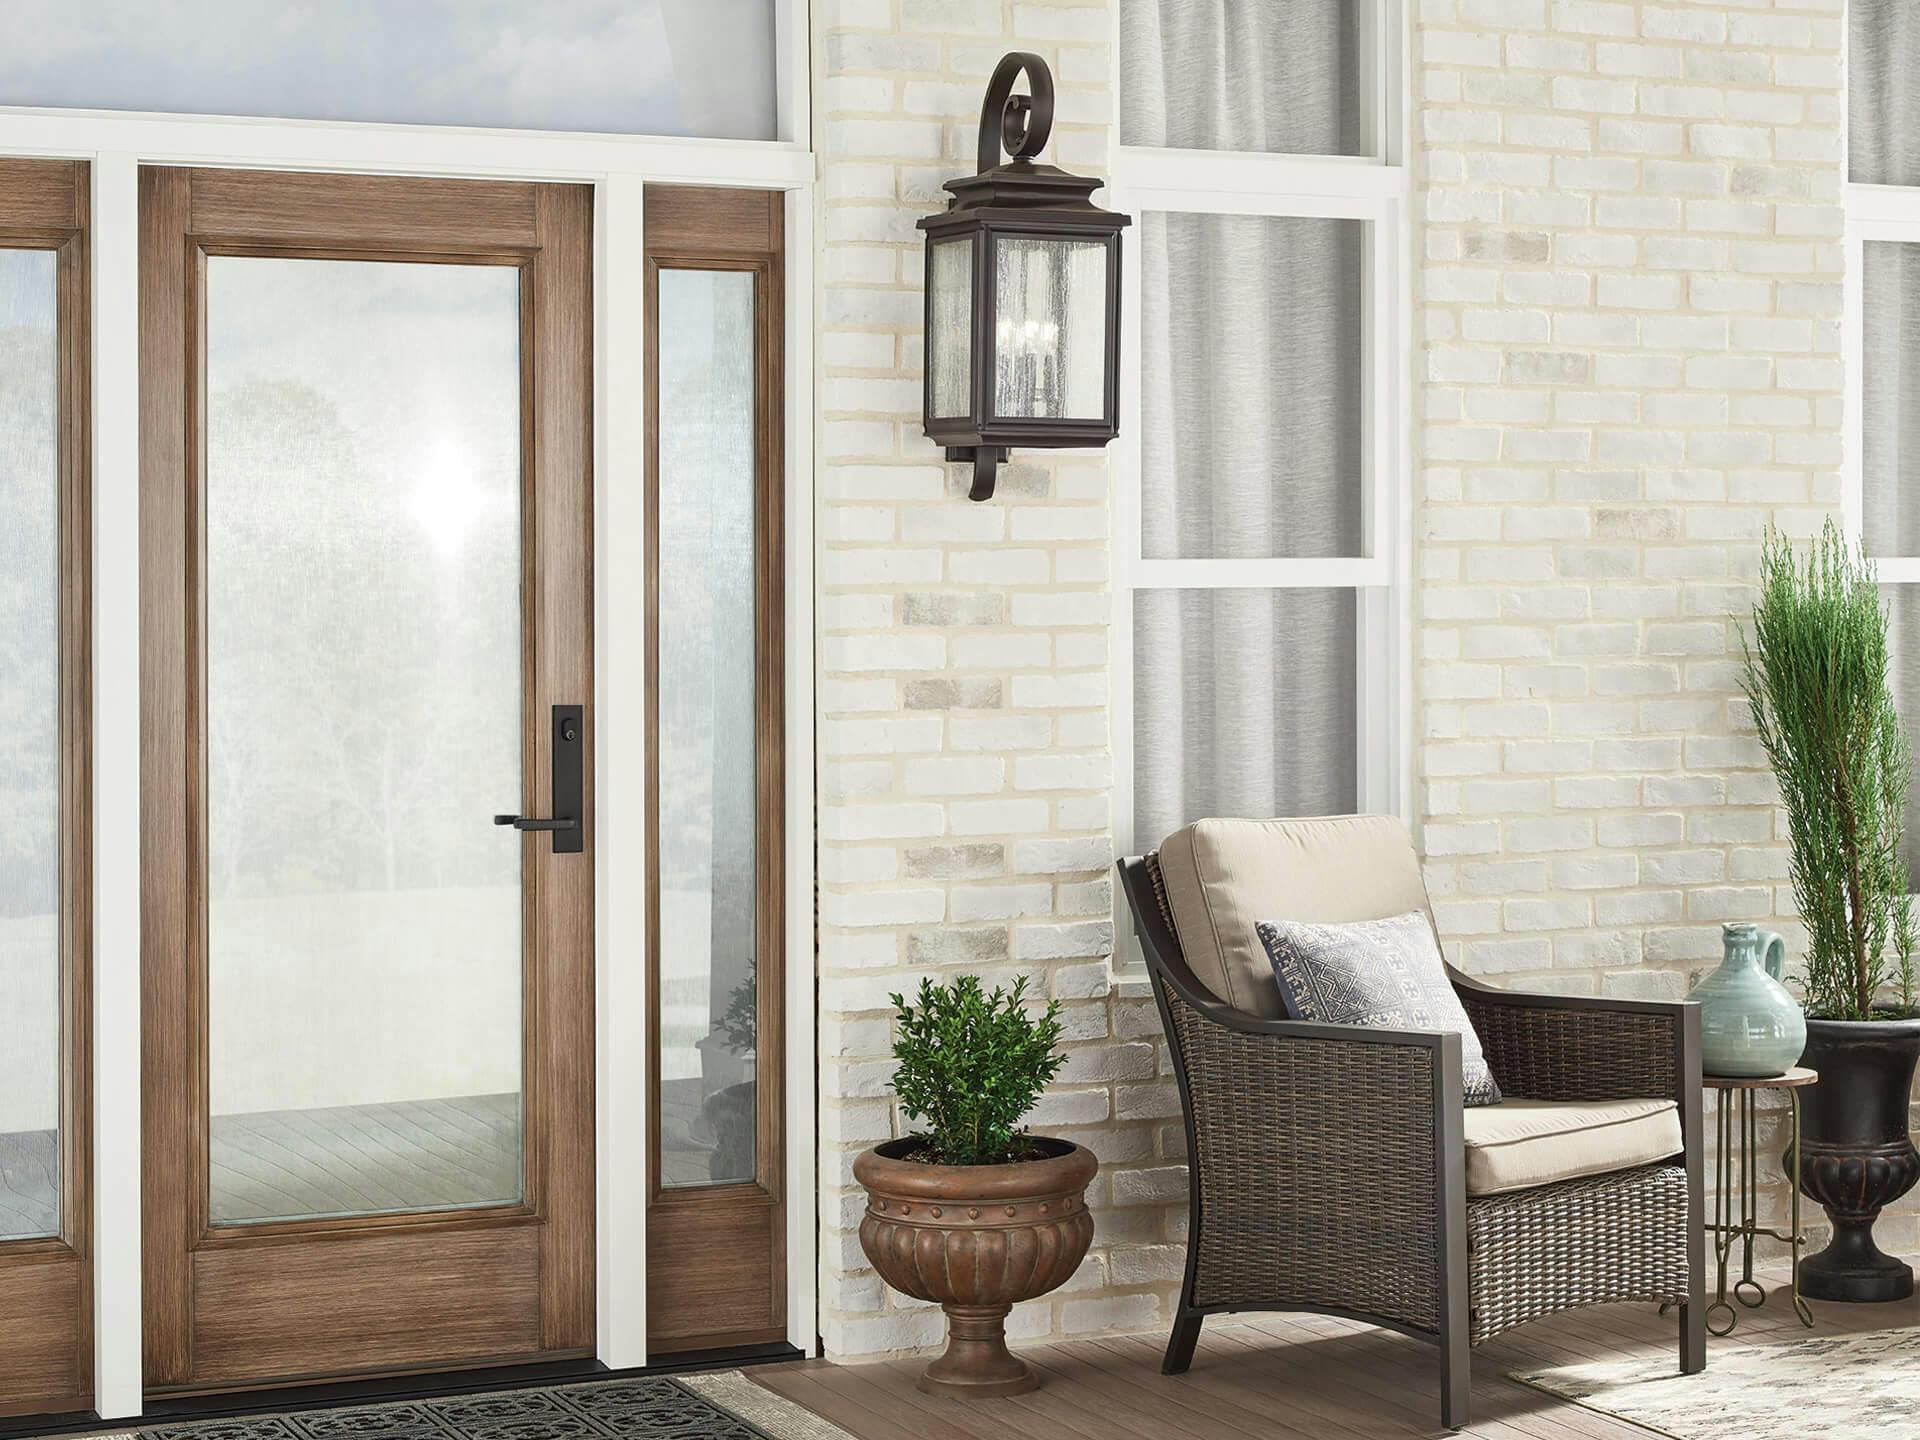 Image of a front porch with a Wiscombe Park exterior wall light mounted to the side of the door 